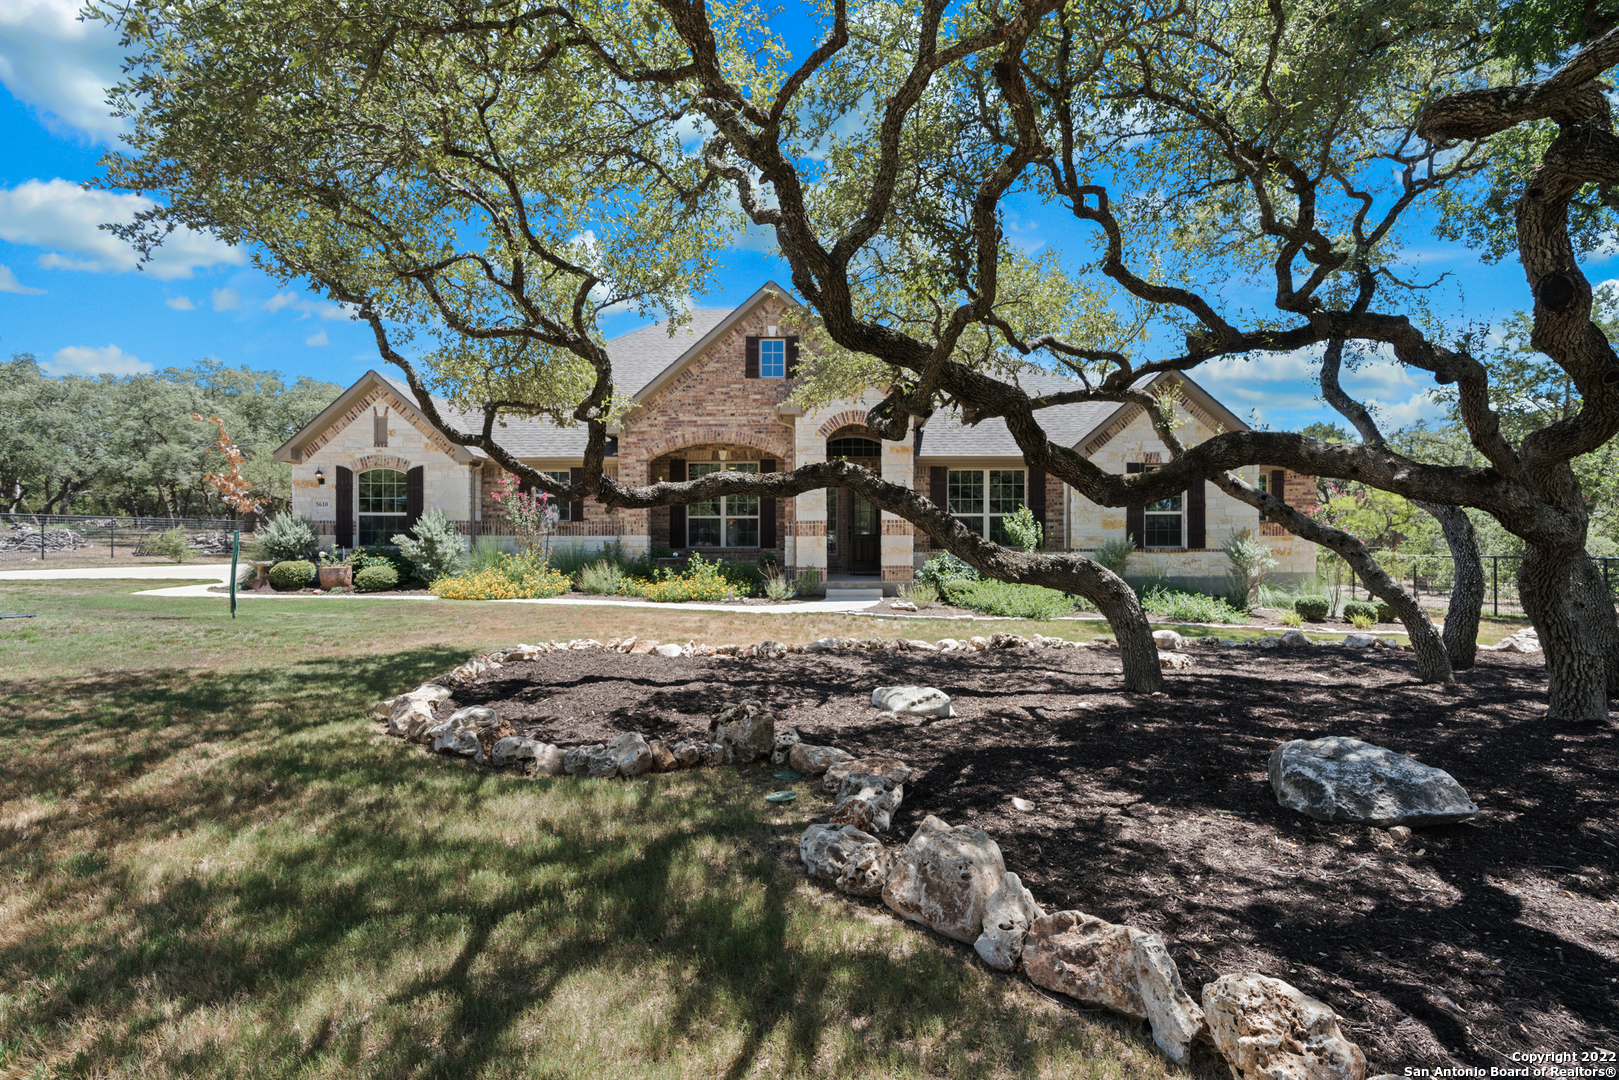 This immaculate estate is nestled amongst 40+ mature oak trees on over 1 acre with no backyard neighbors for the ultimate peace and tranquility. Meticulously maintained, this home is the essence of move-in ready. Upon arrival, guests are greeted by a manicured lawn and delicate landscaping guiding the extended driveway. Inside, the grand foyer leads to an open floor plan suitable for entertaining. The living space showcases tray ceilings and a warm fireplace surrounded by picture windows with magazine-worthy views. Plantation shutters can also be seen throughout the entire home. To the gourmet kitchen, revel in the custom cabinetry complemented by granite counters and a center island with bar seating. Above the stove, the delicate Longleaf Pine can no longer be bought and is cherished by craftsmen. Stainless steel appliances and recessed lighting complete the kitchen. The dining area offers a unique touch like no other. 100-year-old Bead Board comes from an old barn estate, like the Longleaf pine, and adds character to the home. The luxurious-sized primary suite highlights natural lighting and plantation shutters. To the spa-like en suite, bask in the extended walk-in shower with dark-tile accents and rainfall shower head. The en suite also has dual sinks and a soaking tub. The roomy walk-in closet was built with extra storage in mind! The split bedroom floor plan offers a secondary bedroom on the same side of the primary with the remaining two secondary bedrooms on the opposite side with a spacious laundry room and flex space or retreat. Outside, enjoy al fresco dining on the covered patio, overlooking the acreage ahead. Lighting can be found throughout the trees in the front lawn for visibility at night. In addition to all this home has to offer, the community offers a 24-hour guard gated community and is just 7 miles from all New Braunfels has to offer. With many community amenities including a pool, tennis court, basketball court, playground, and party pavilion, come see this property today.